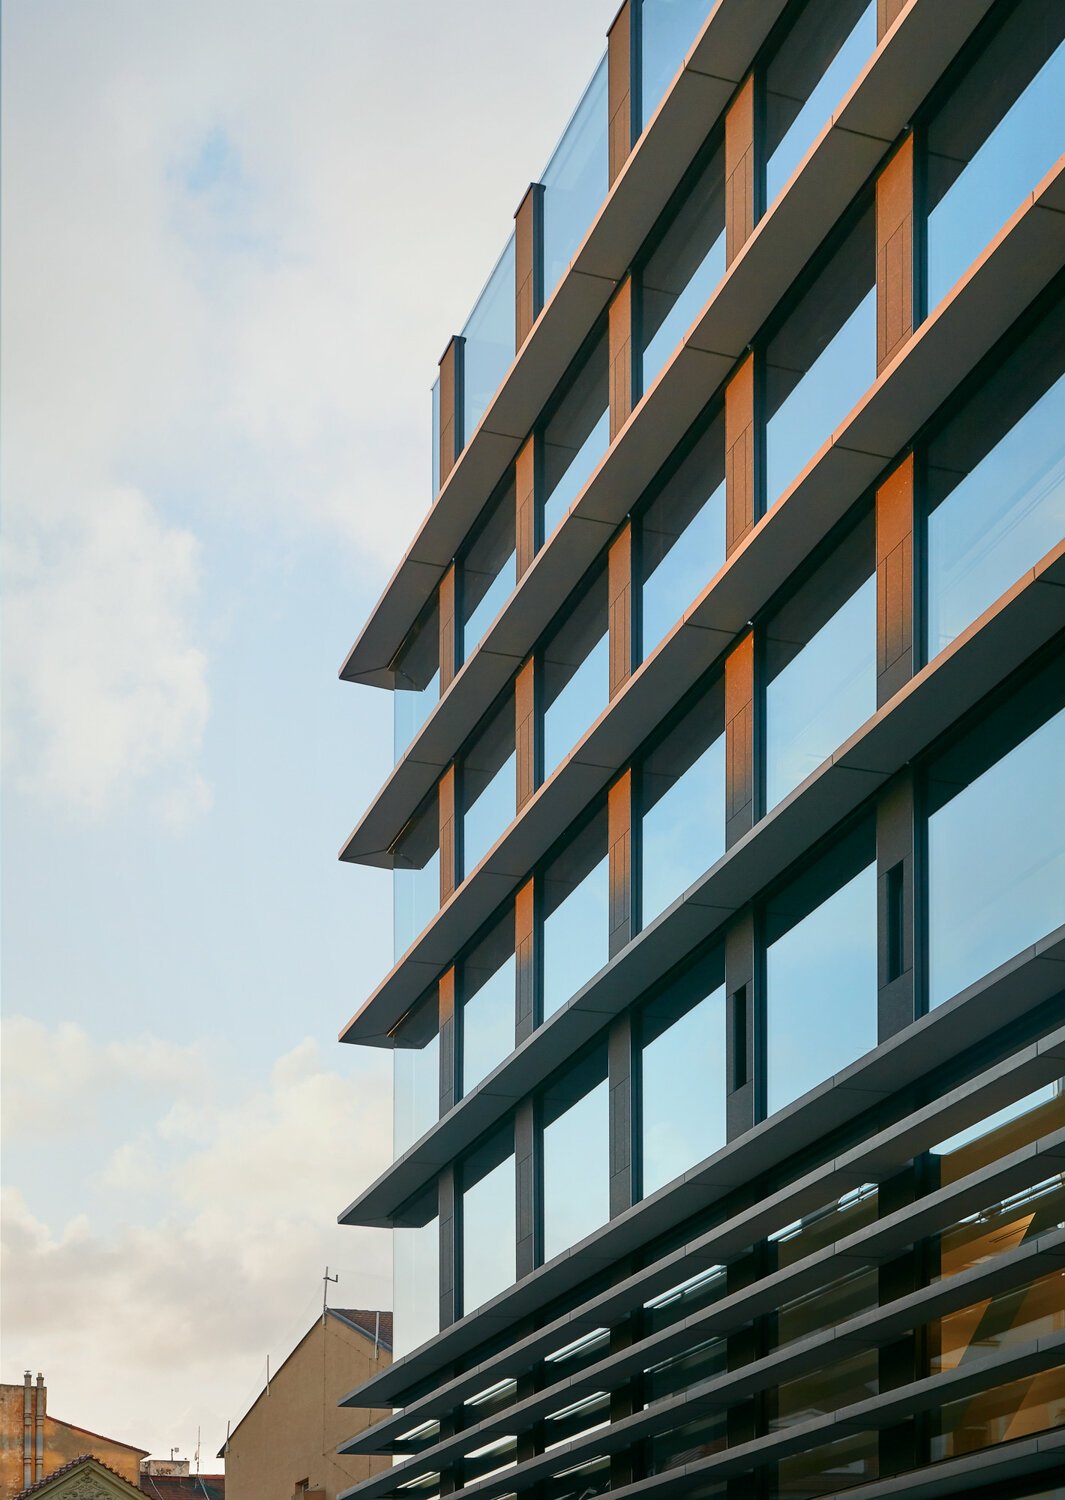 exterior+photography+architecture, detail of building prague, jiri lizler architecture photographer.JPG